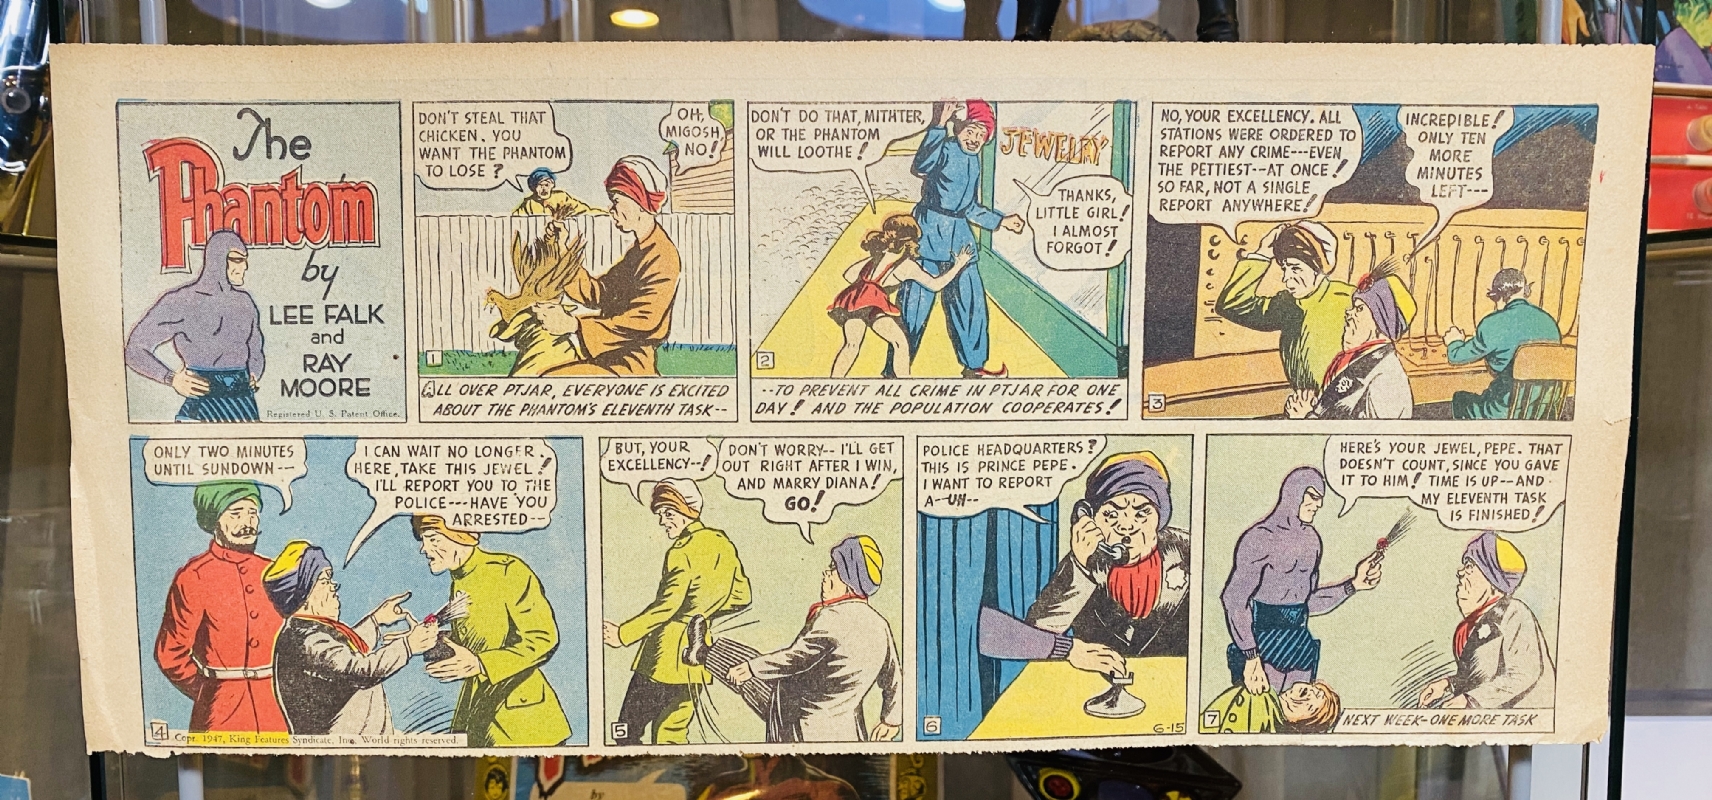 Ray Moore - The Phantom Sunday, 1947 original comic strip art (FOR SALE),  in Enter The Phantom's FOR SALE Album - The Phantom by Ray Moore, Wilson  McCoy and others Comic Art Gallery Room